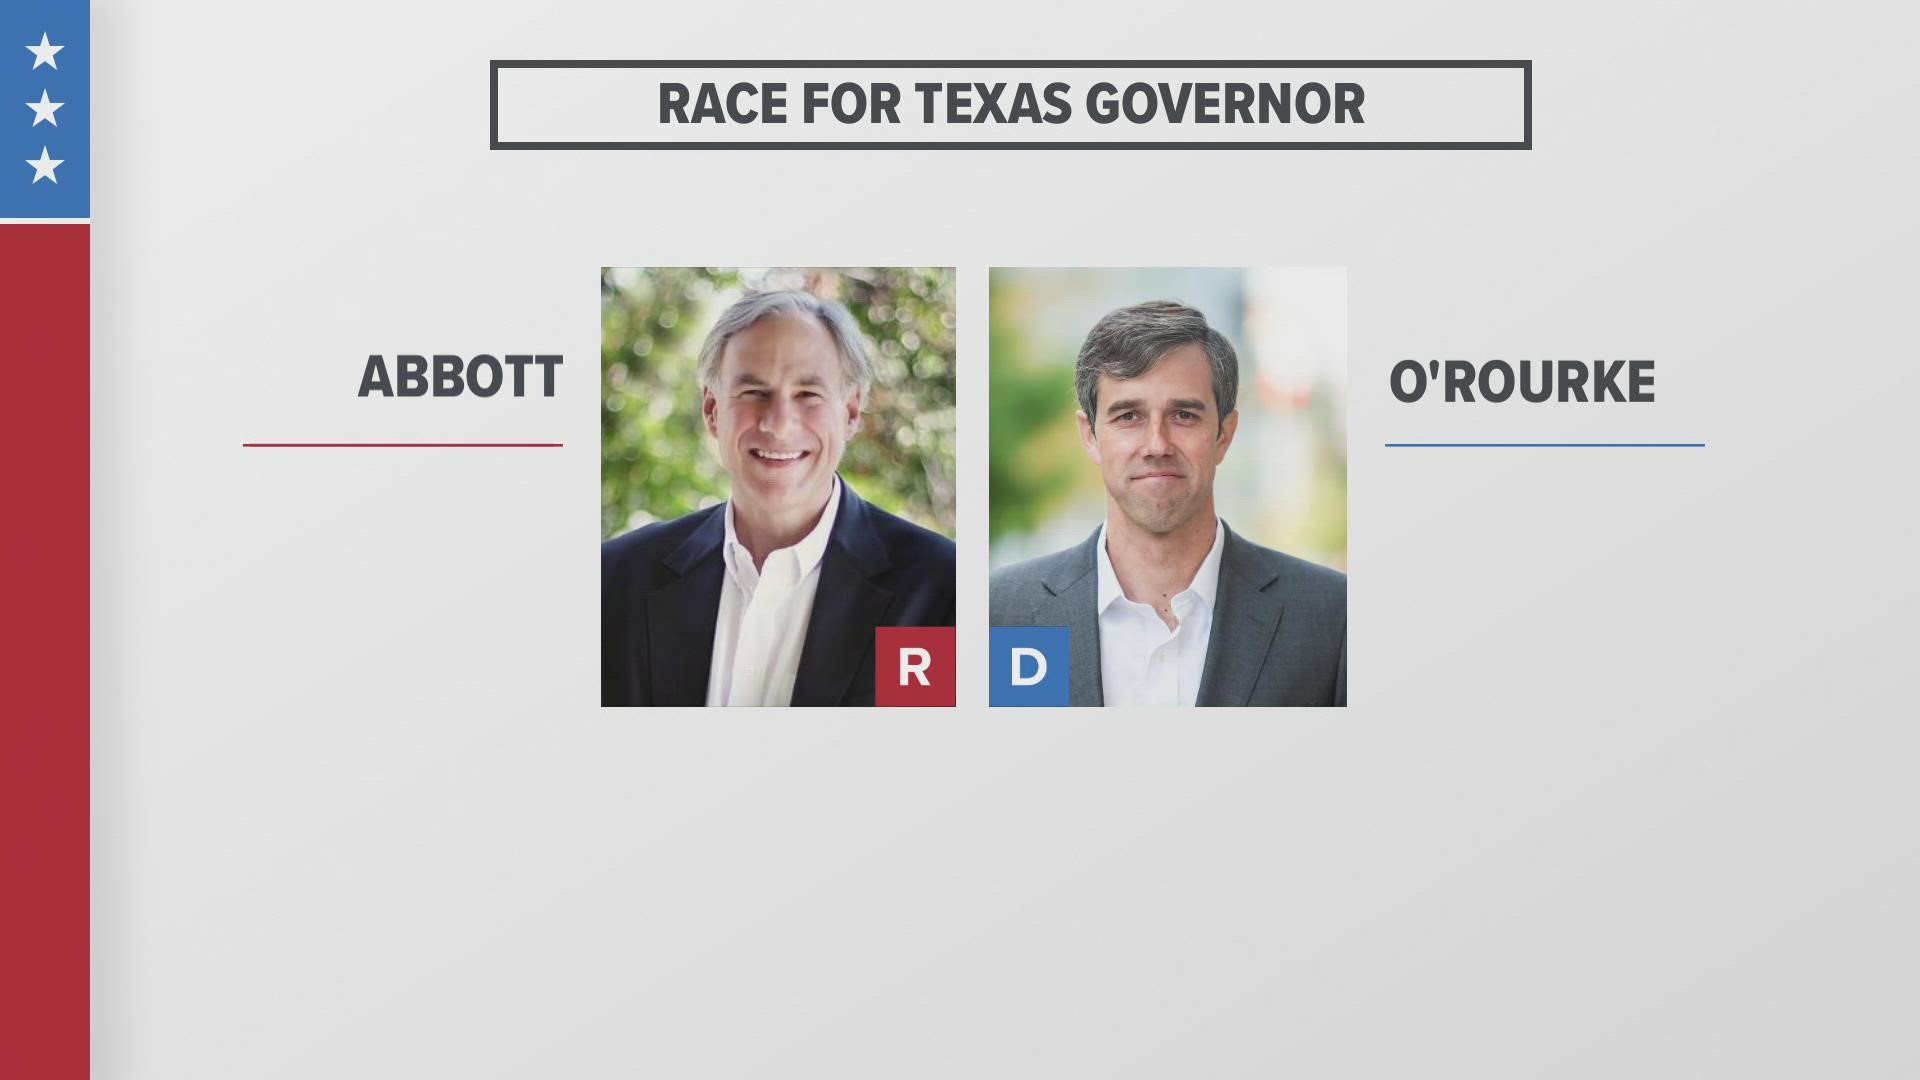 Incumbent Greg Abbott takes nomination for the republican party and Beto O'Rourke gets nomination for democratic party.